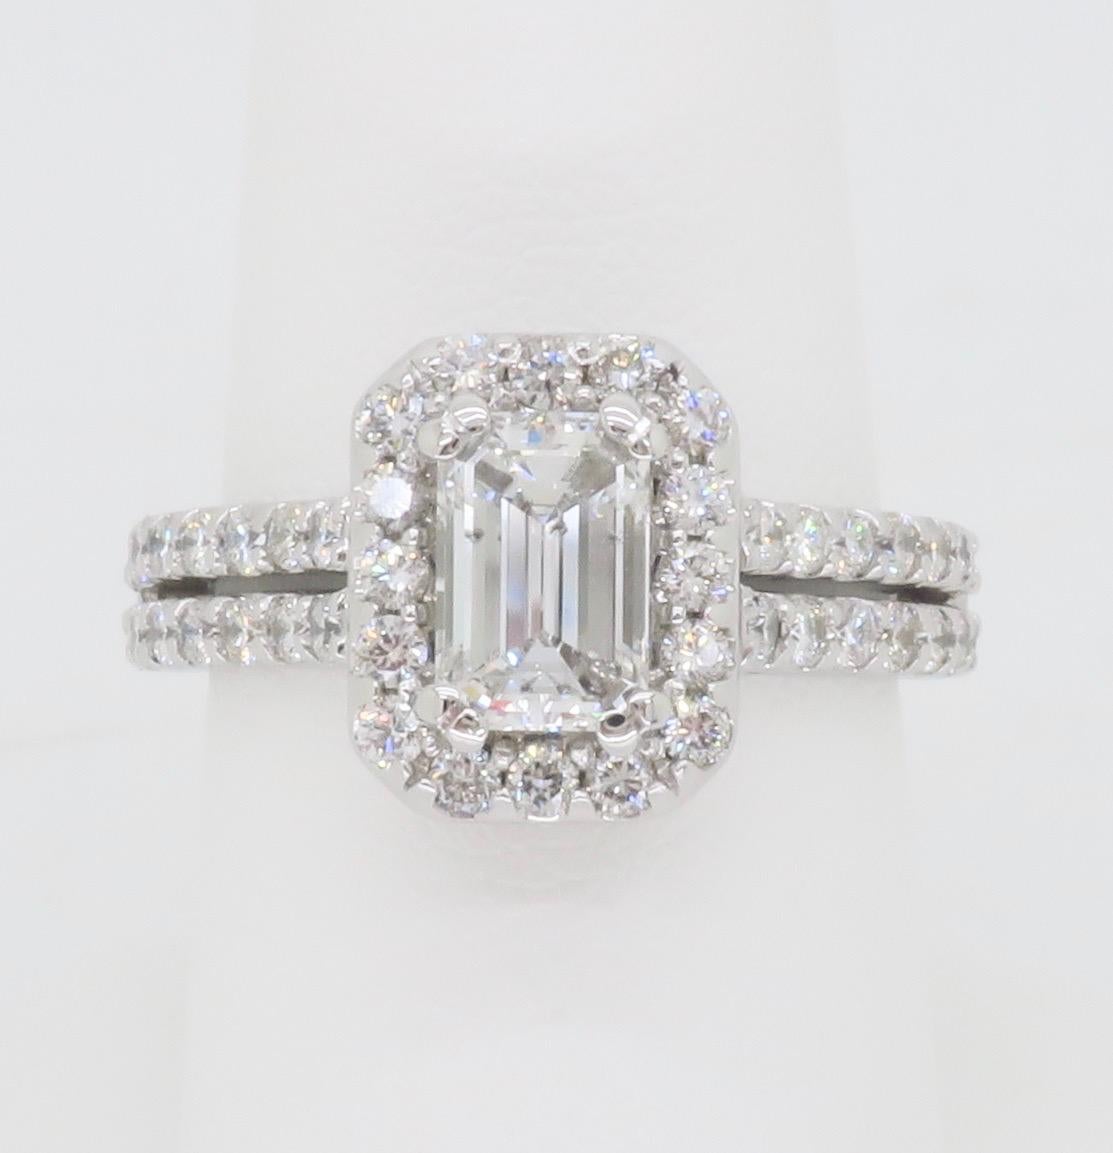 2.14CTW Certified Emerald Cut Diamond Engagement Ring  In Excellent Condition For Sale In Webster, NY